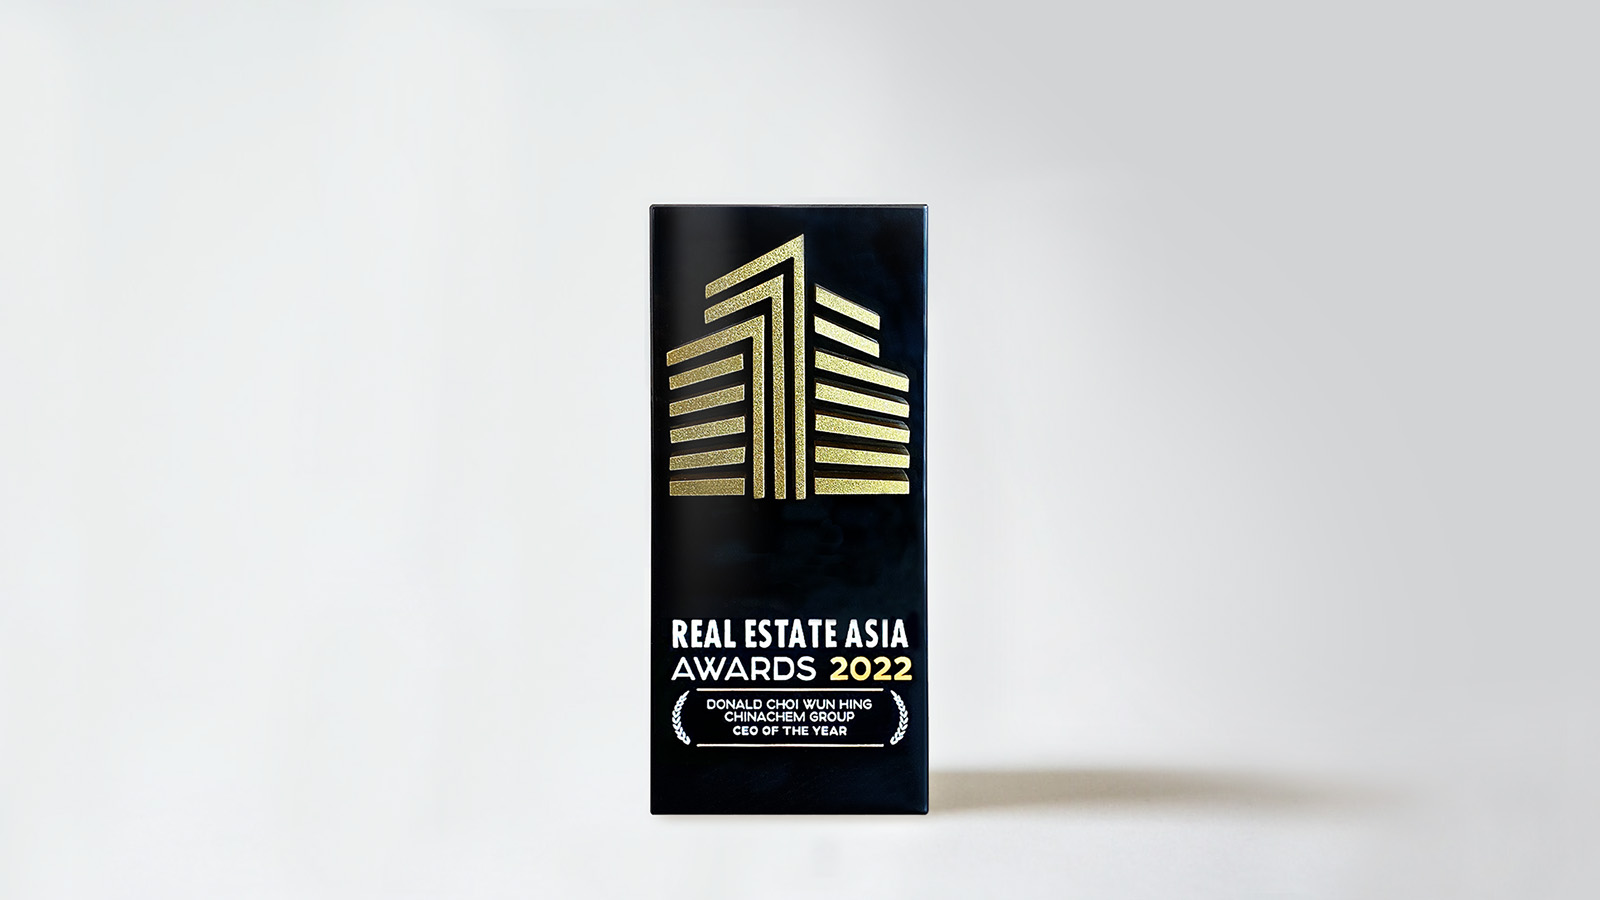 Real Estate Asia Awards 2022 | CEO of the Year | 华懋集团 蔡宏兴